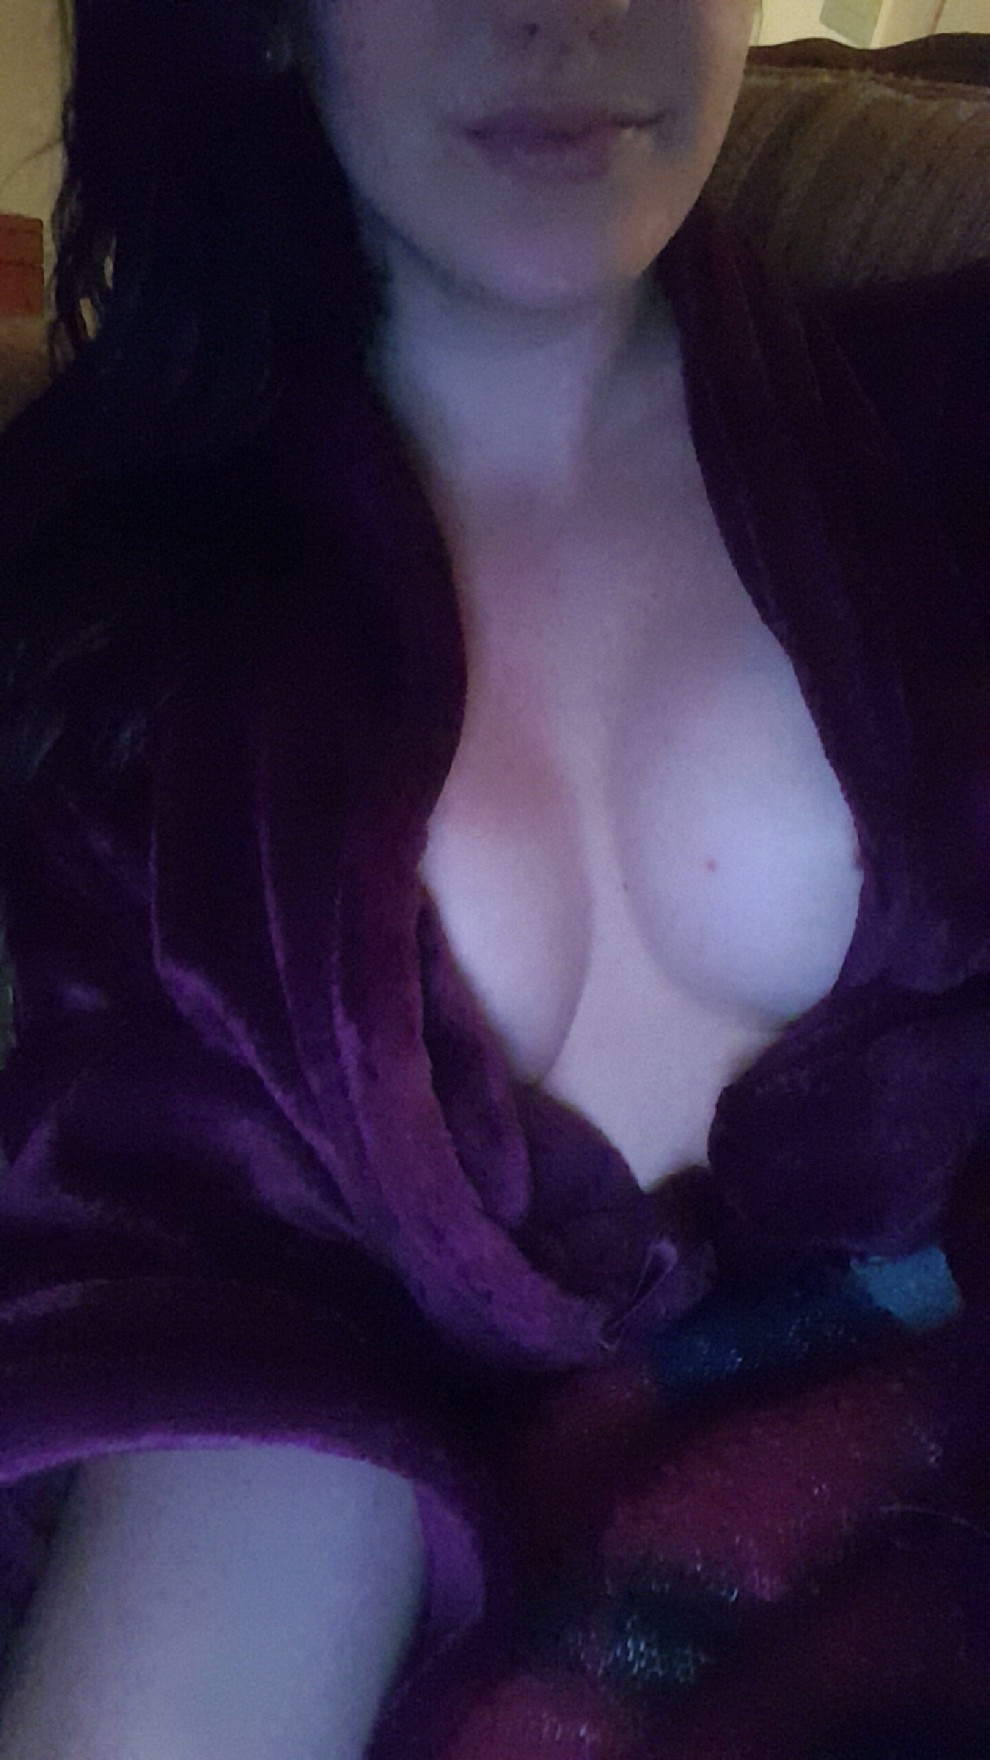 What's underneath my robe?